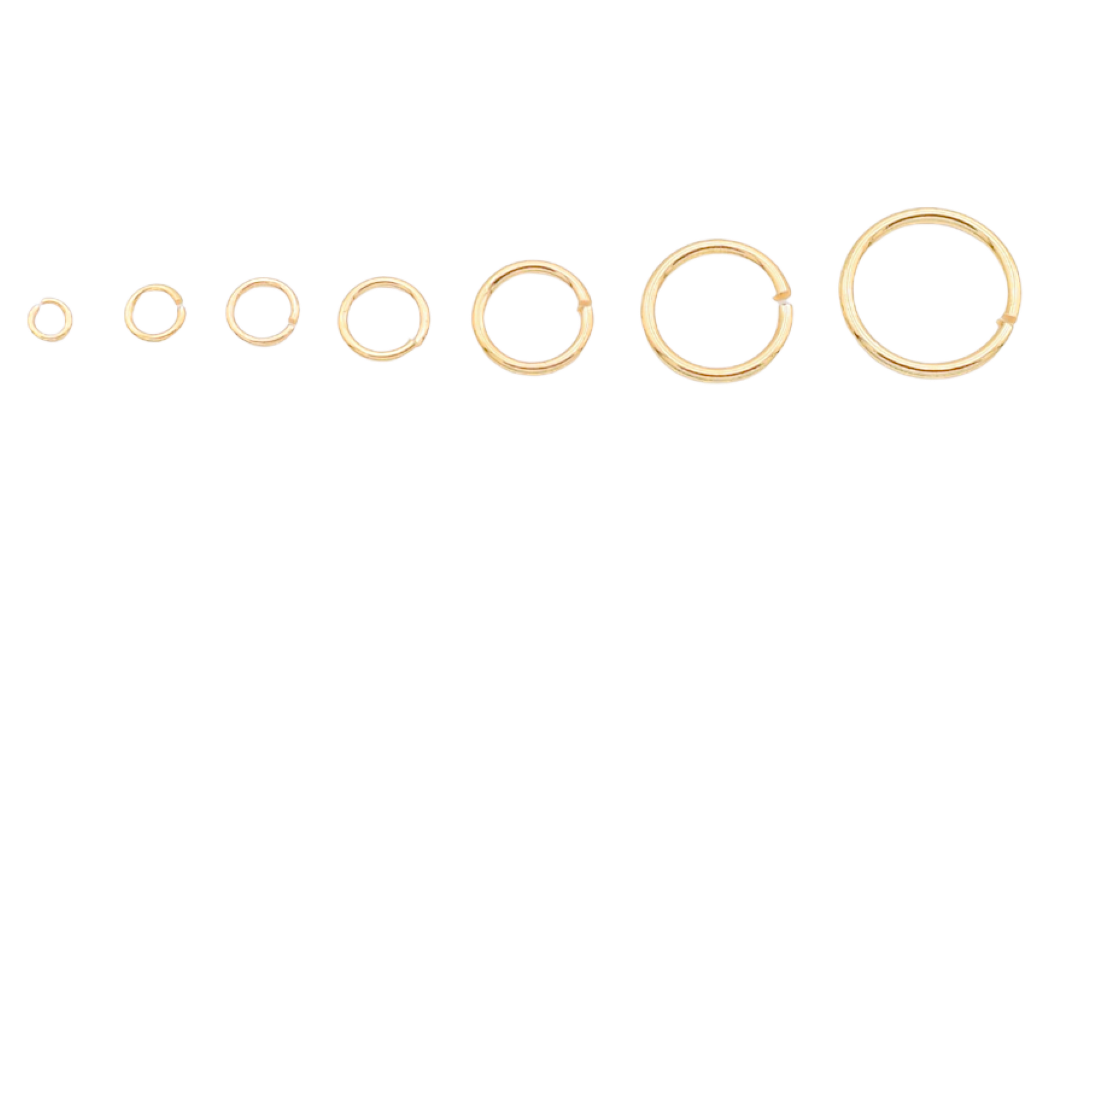 Open / Closed 18K Gold Filled EP Jump Ring Findings Round Ring 2mm/3mm/4mm/5mm/6mm/8mm/10mm/12mm for Jewelry Supplier and Wholesale BeadsFindingDepot